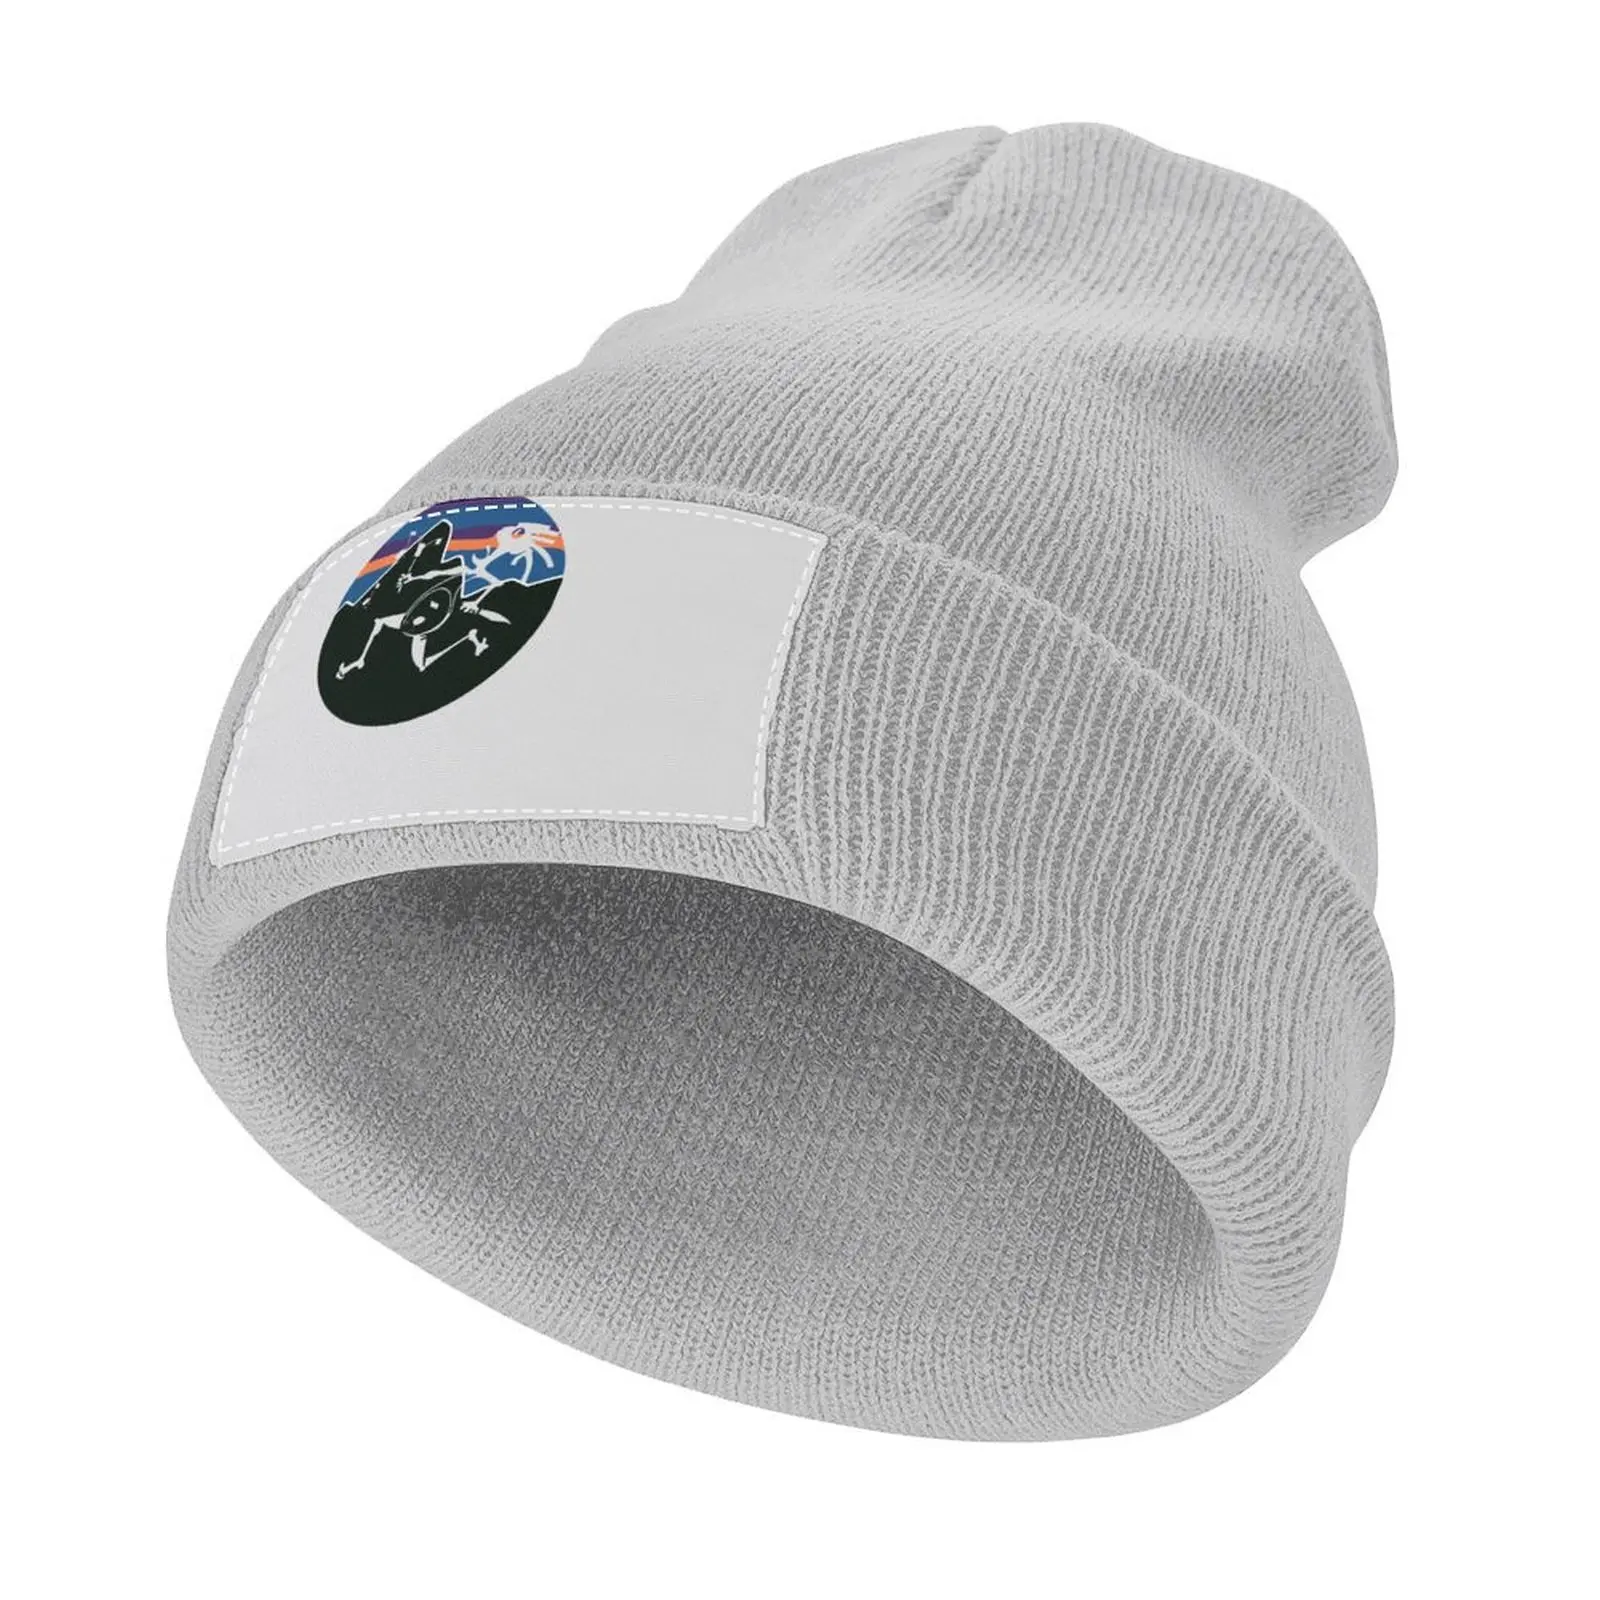 

Widespread Panic - Papa&x27;s Home Adult Uni E Knitted Cap Sunscreen Thermal Visor Hat Girl Men's